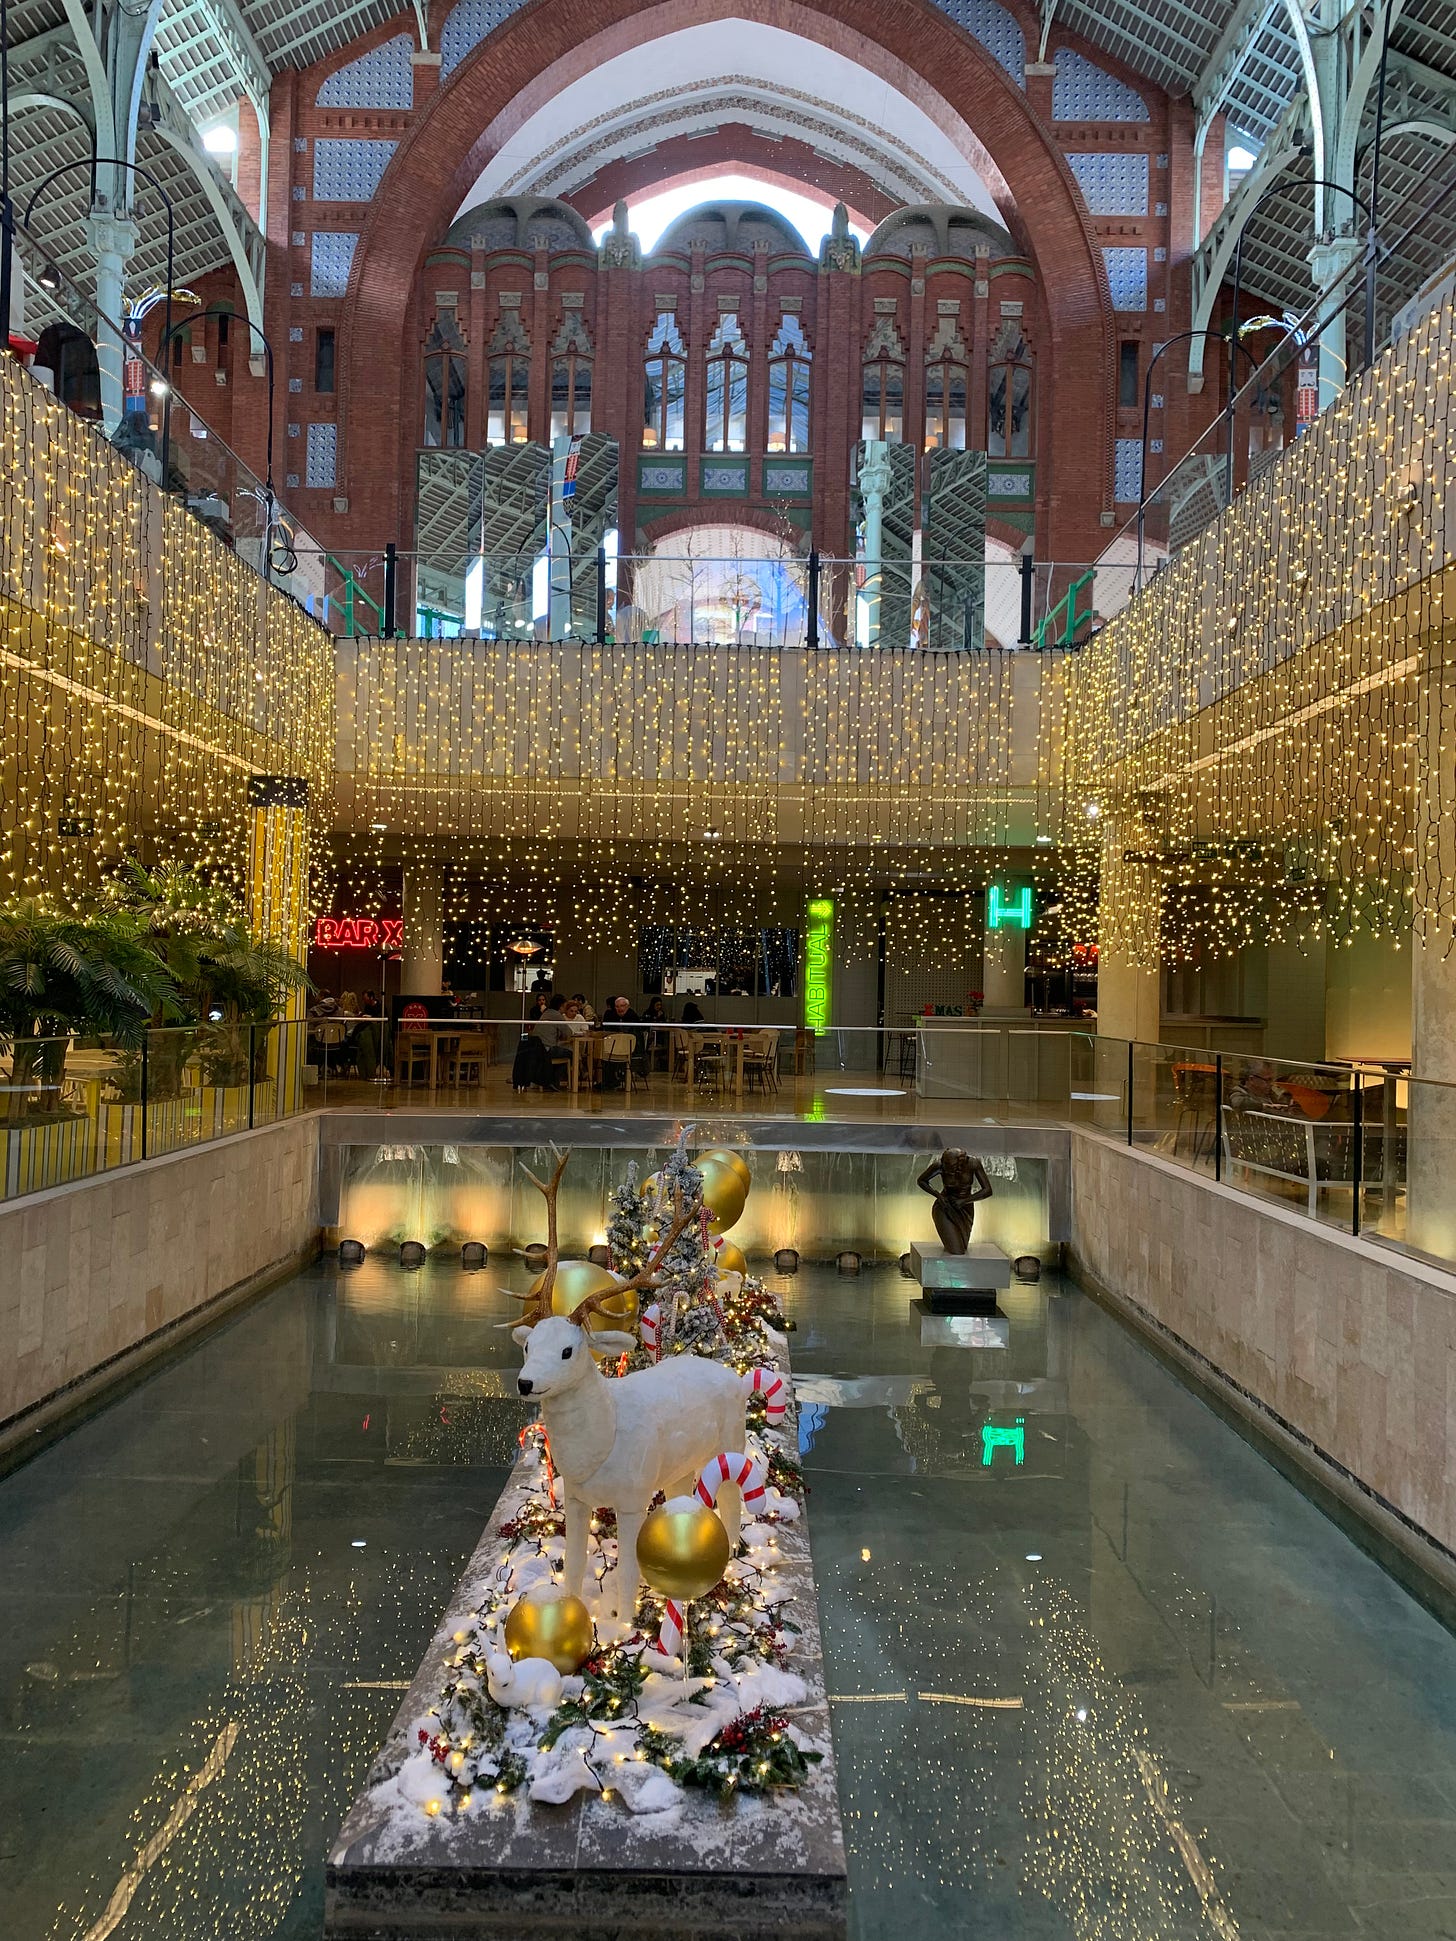 The lower level of Colon Market has curtains of lights hanging around the central decorative pool and in the center is a Christmas scene with reindeer and other festive decorations.